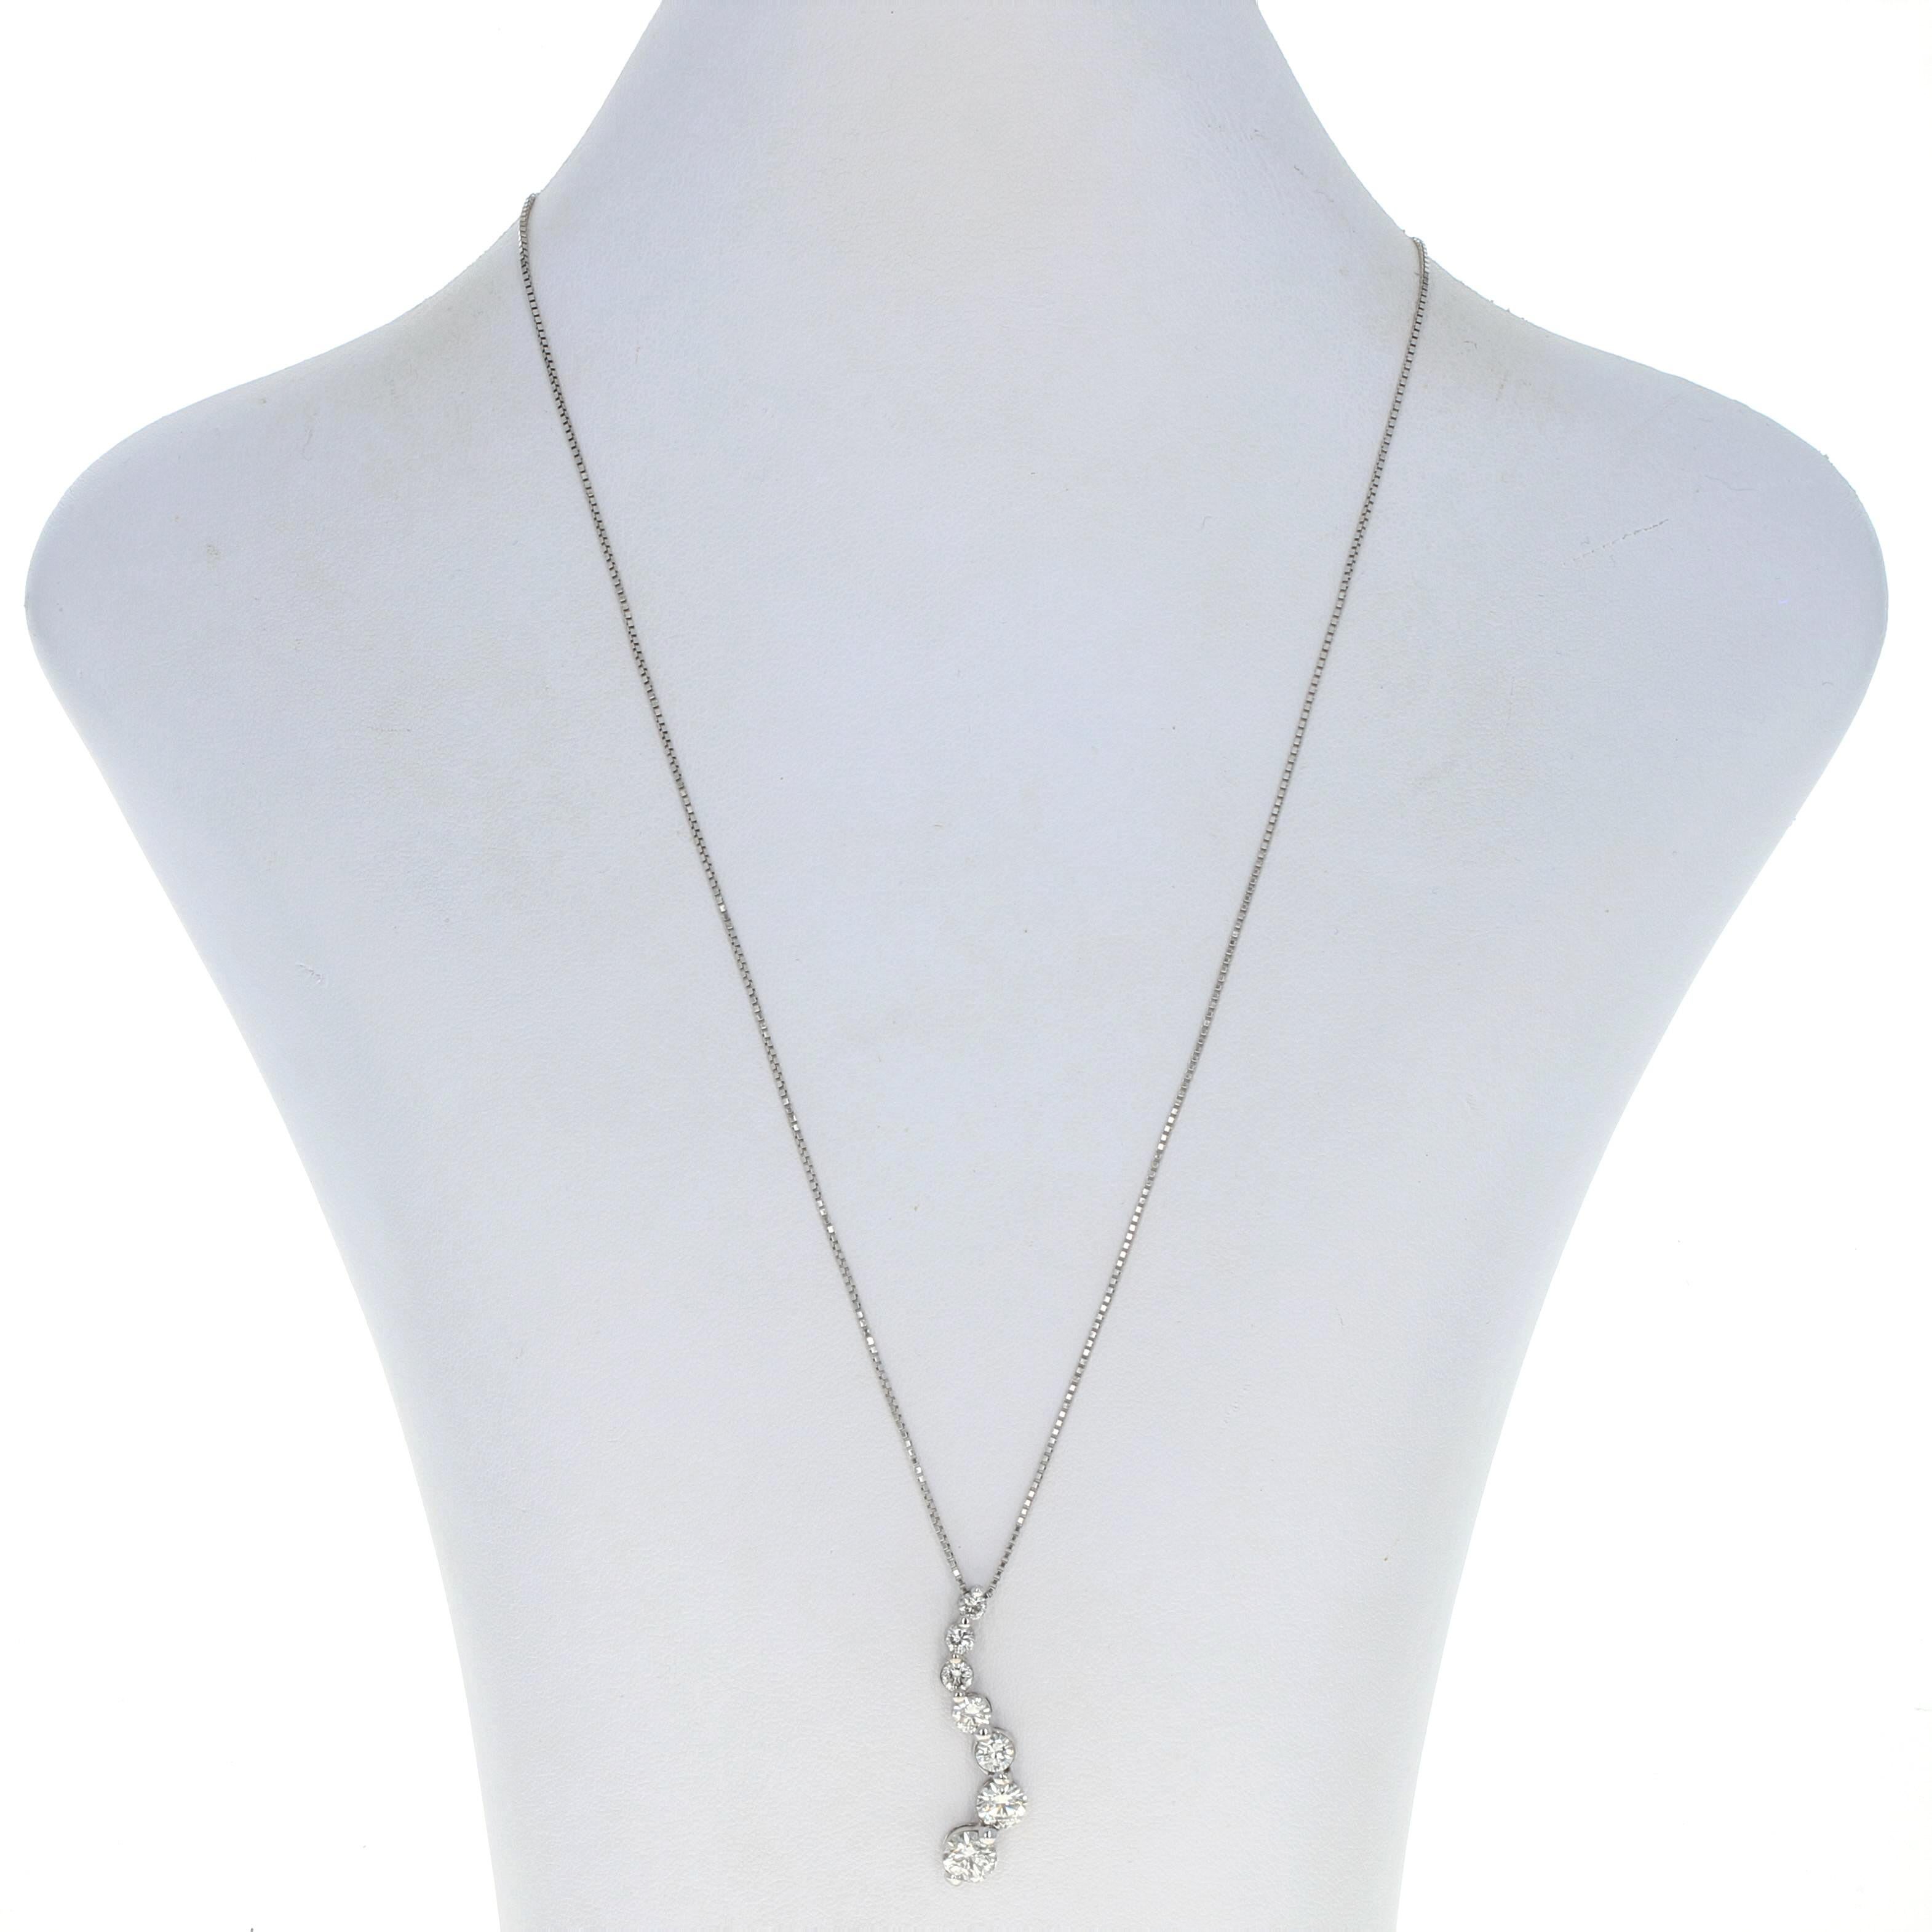 Metal Content: 14k White Gold

Stone Information: 
Natural Diamonds
Total Carats: 2.60ctw
Cut: Round Brilliant 
Color: H - I
Clarity: SI2 - I1

Style: Pendant
Chain Style: Box
Fastening Type: Lobster Claw Clasp
Theme: Graduated Journey 

Pendant